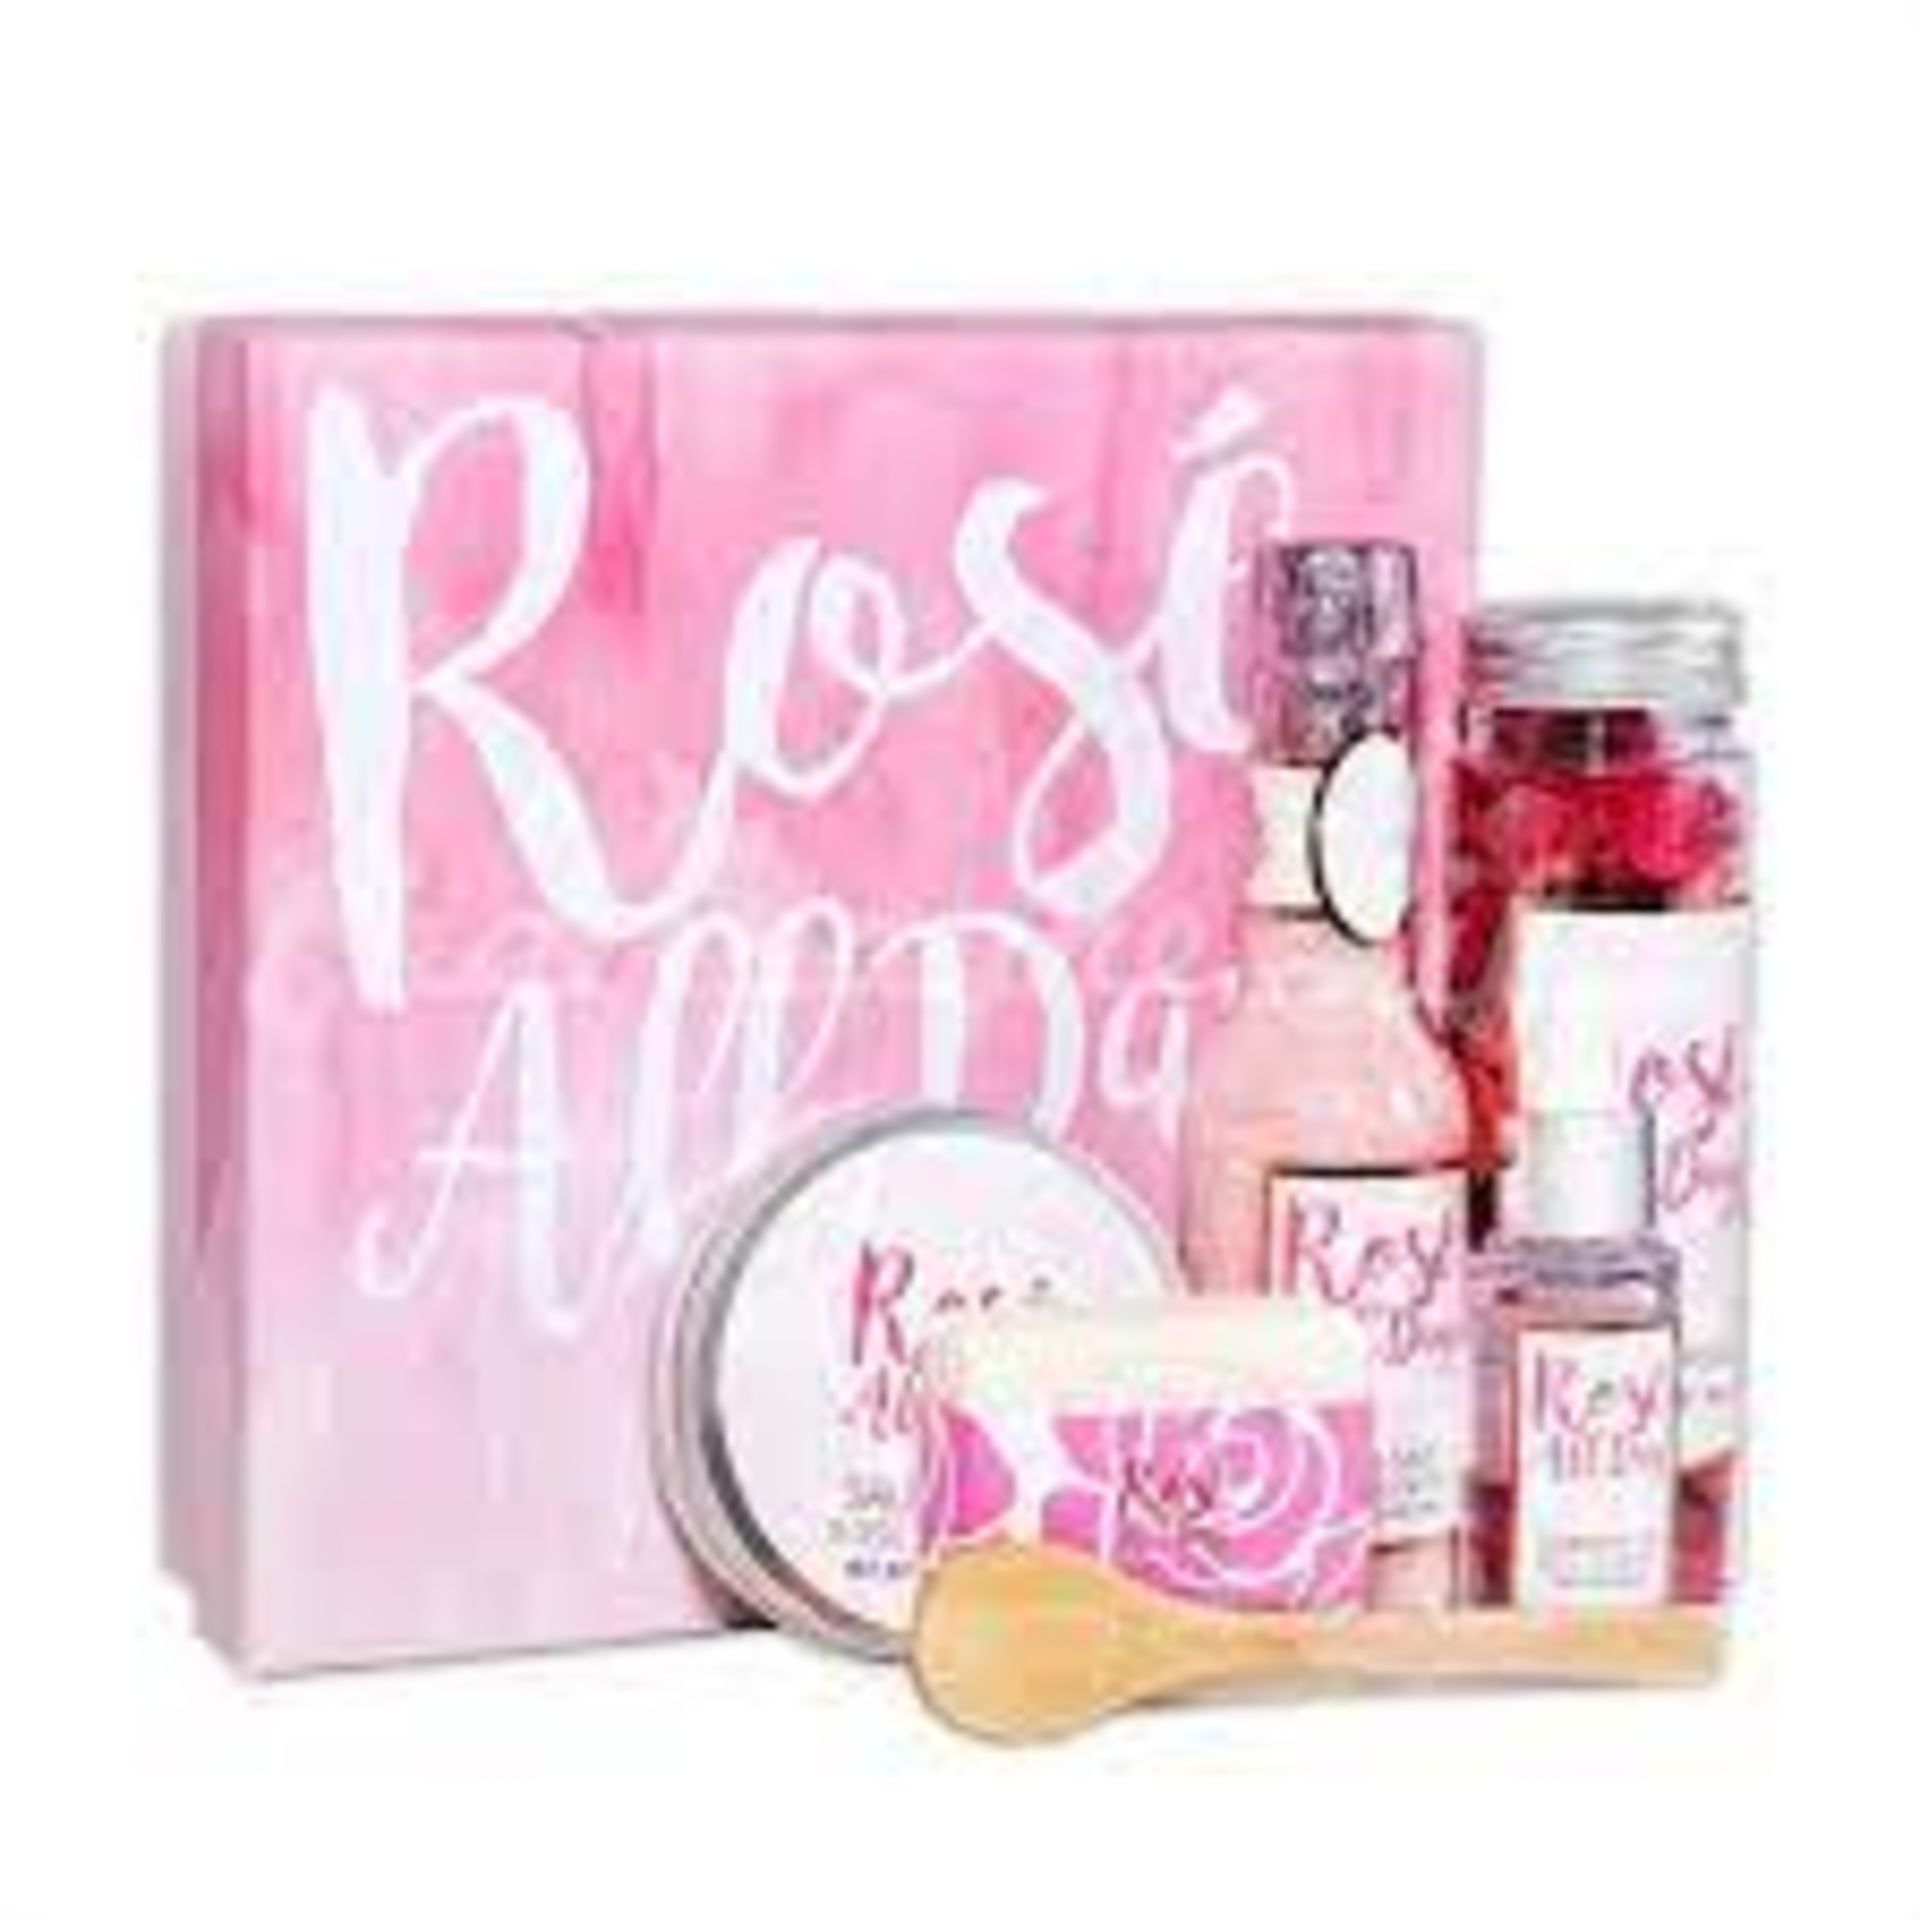 New Packaged Rose All Day Bath Gift Box. (Sku:Bff-Bp-11) Best Gift Set For Women - Our Spa